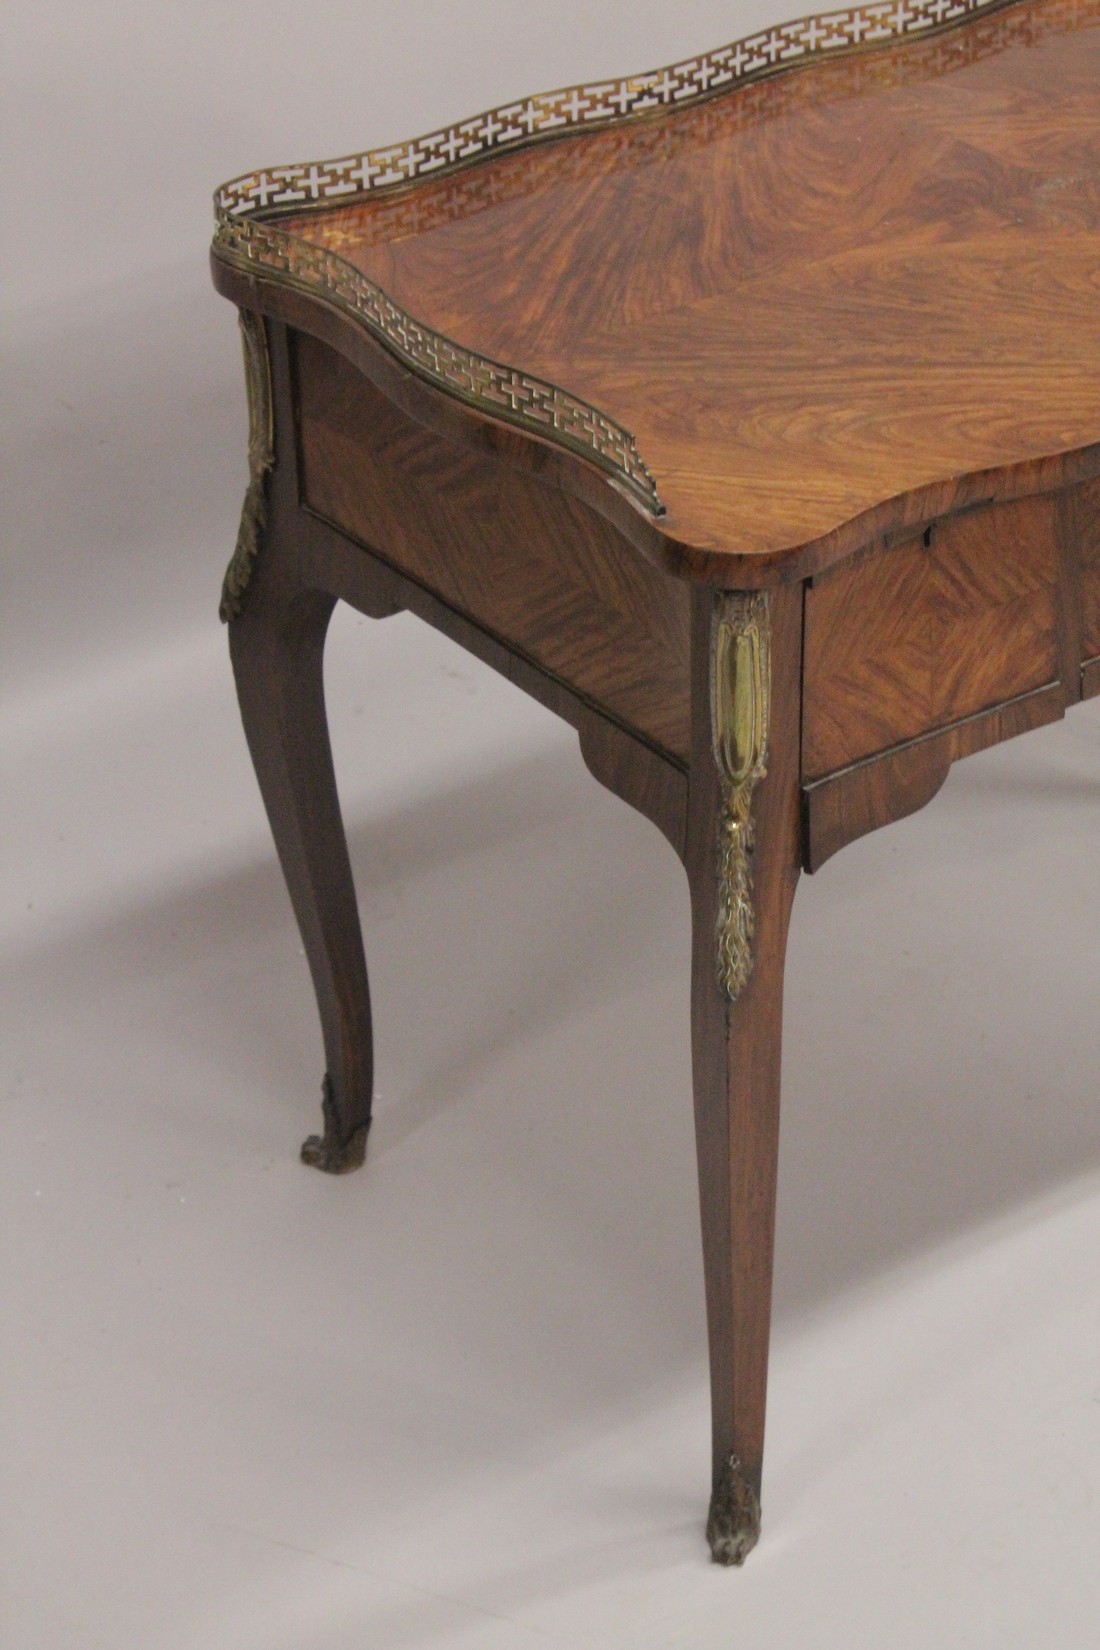 AGOOD 19TH CENTURY FRENCH KINGWOOD PADROUSE with brass galley and quartered top, three freize - Image 7 of 7